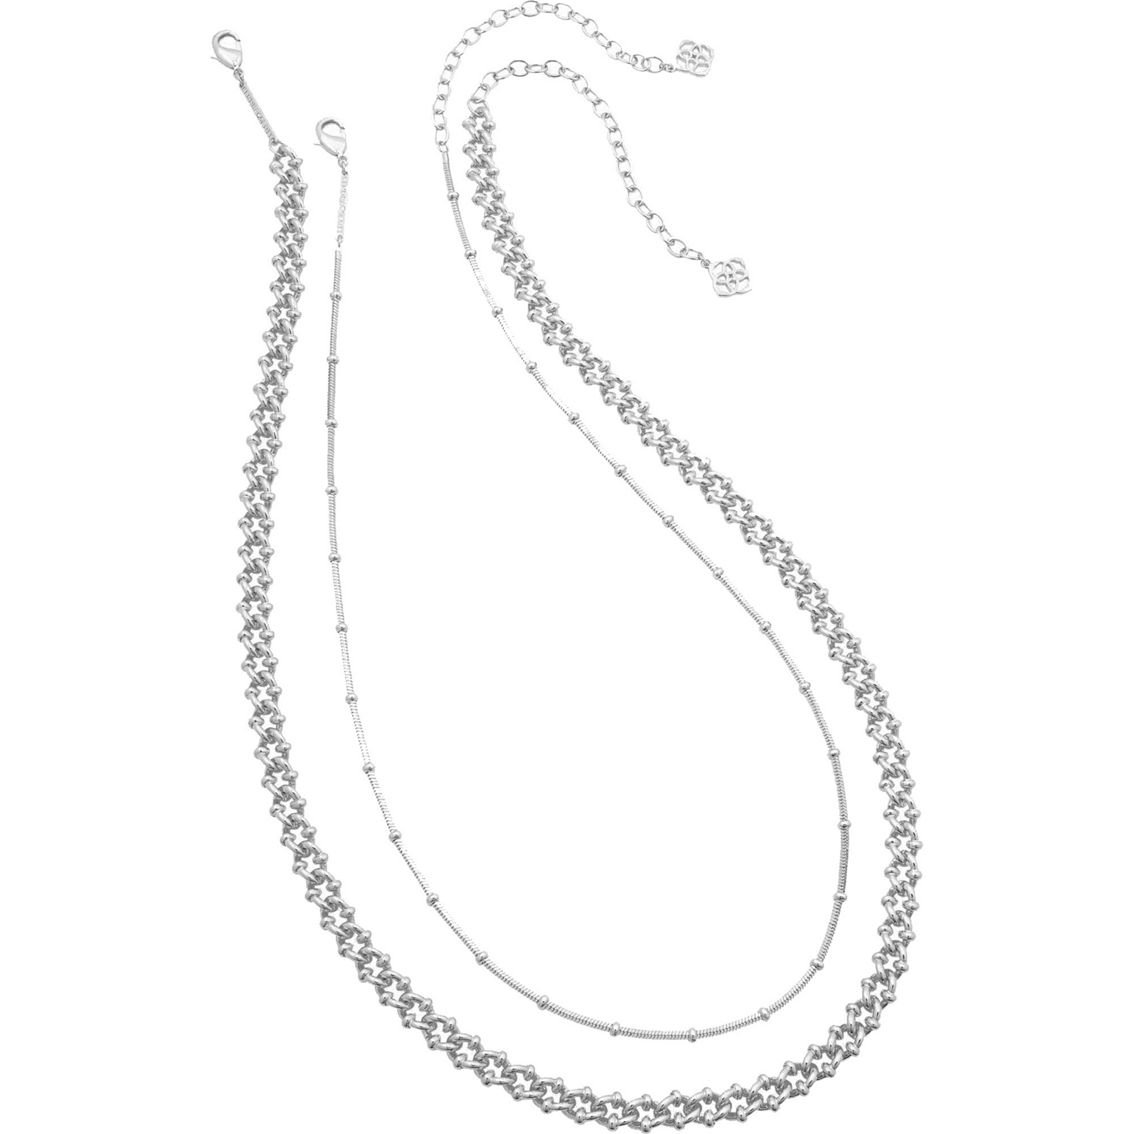 Kendra Scott Silver Lonnie Set Of 2 Chain Necklace | Other Necklaces ...